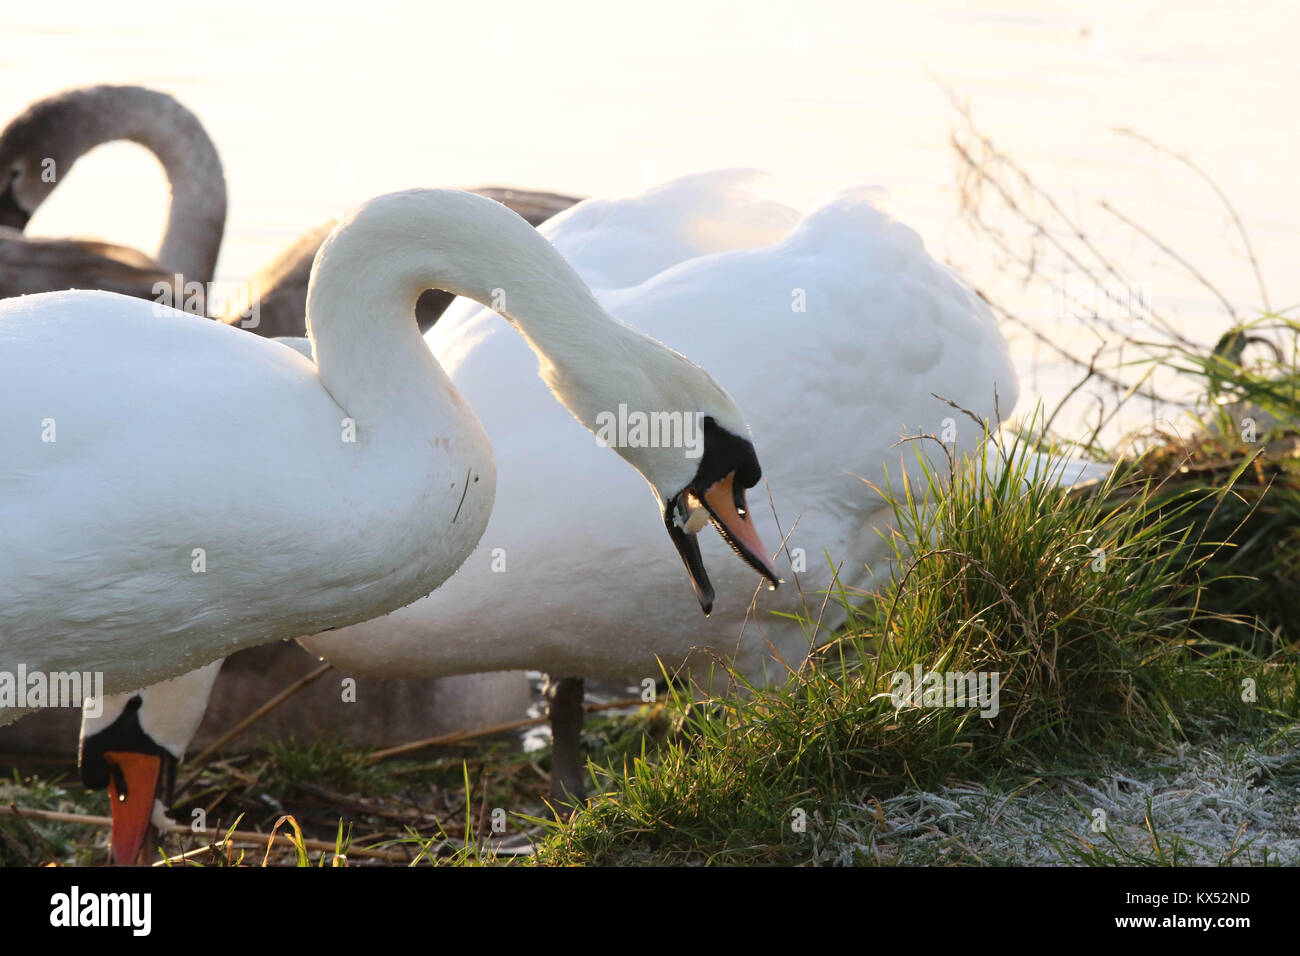 Lough Neagh, Northern Ireland. 07 January 2018. UK weather - whilst brighter after a severe overnight frost temperatures struggled to rise much above zero despite a sunny day. In many places the ground was white with frost all day. A mute swan gulps down some bread in the cold conditions at Lough Neagh. Credit: David Hunter/Alamy Live News. Stock Photo